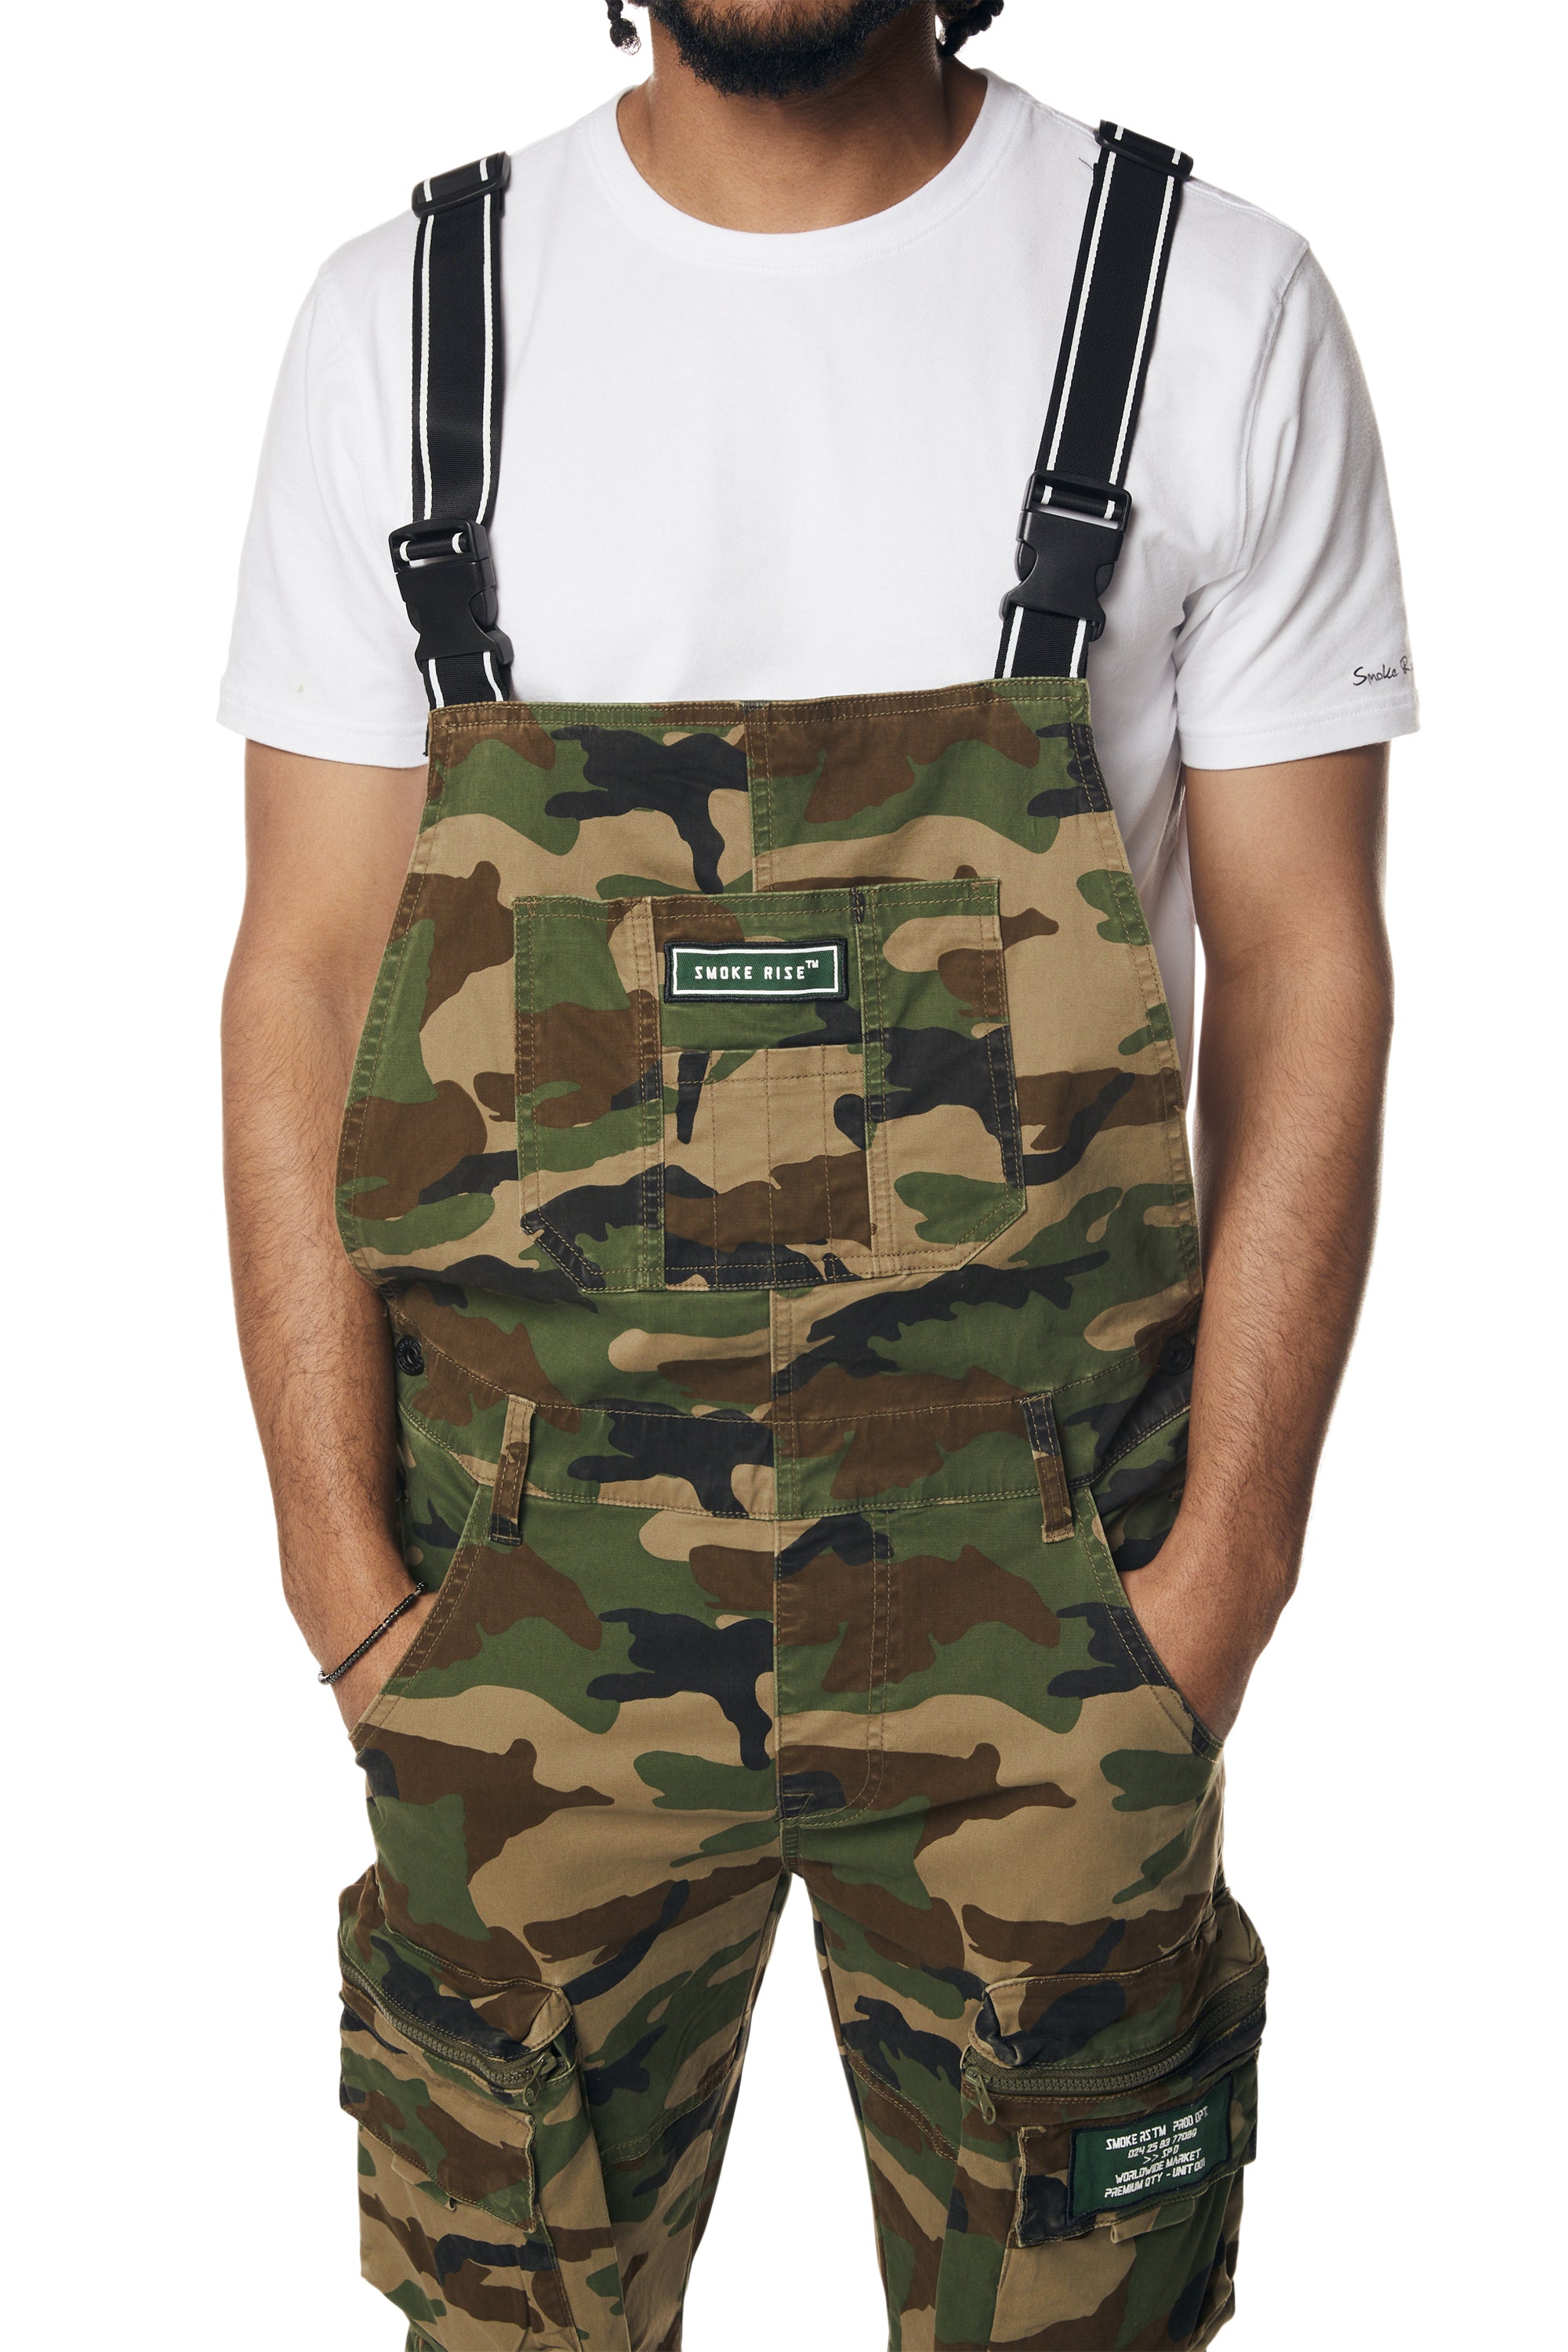 Utility Twill Overall Shorts - Wood Camo